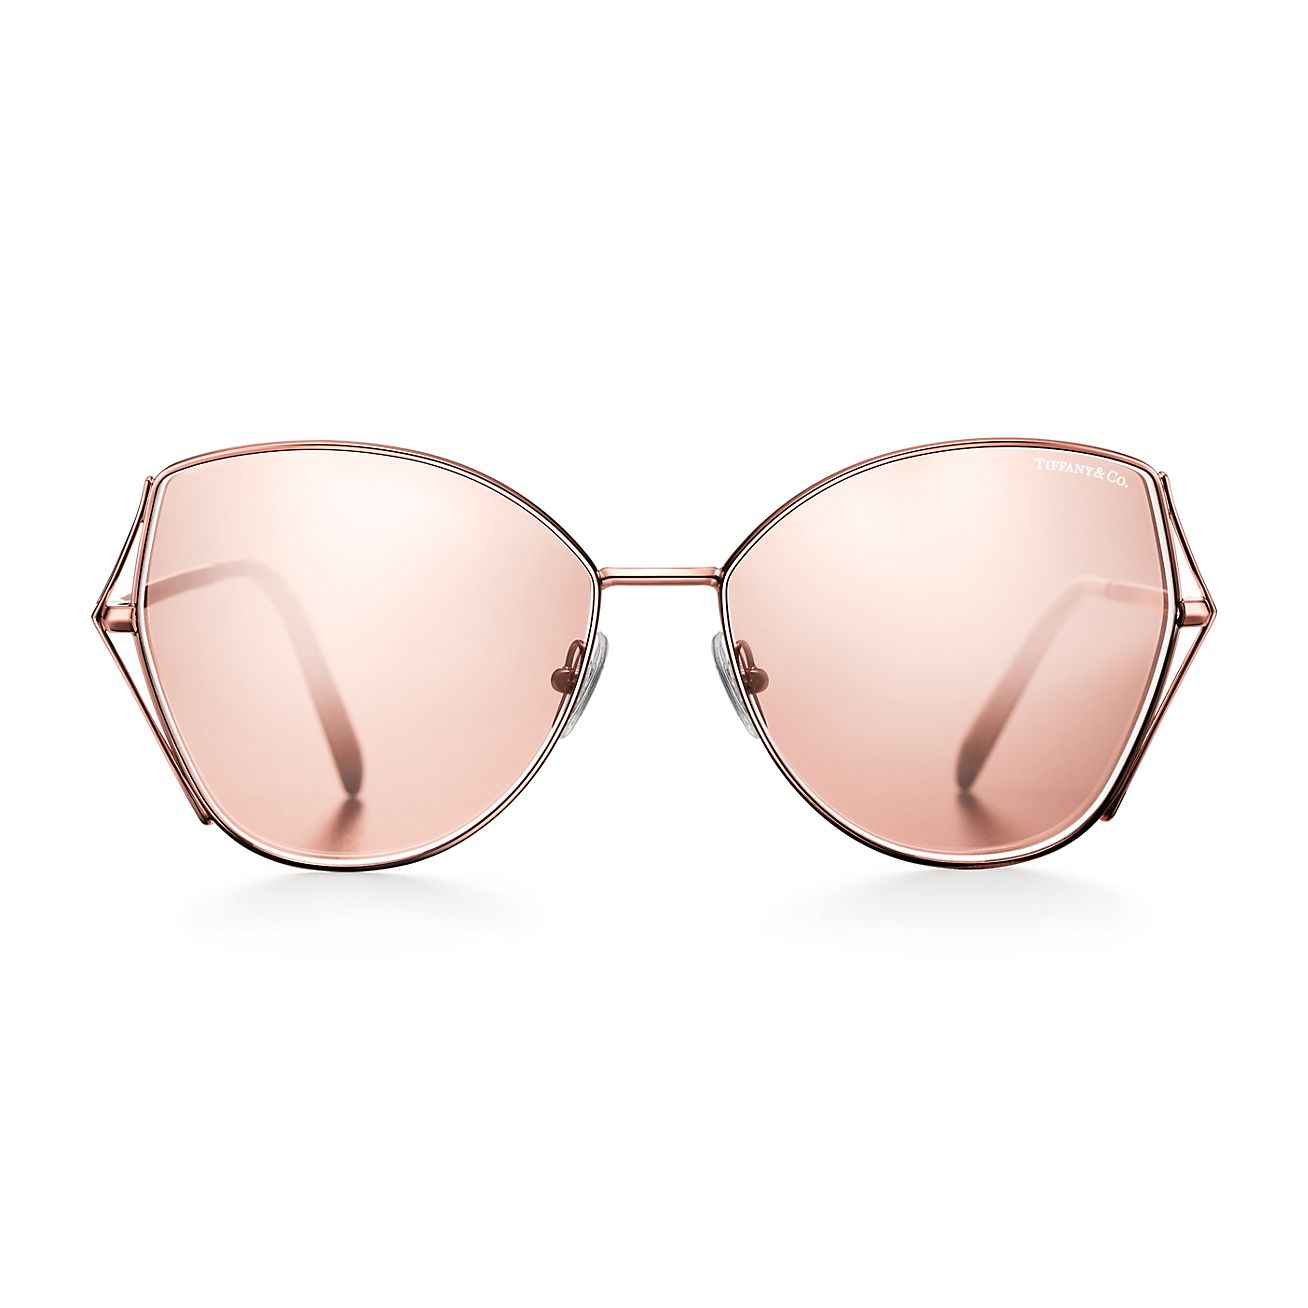 Wheat Leaf butterfly sunglasses in rose 